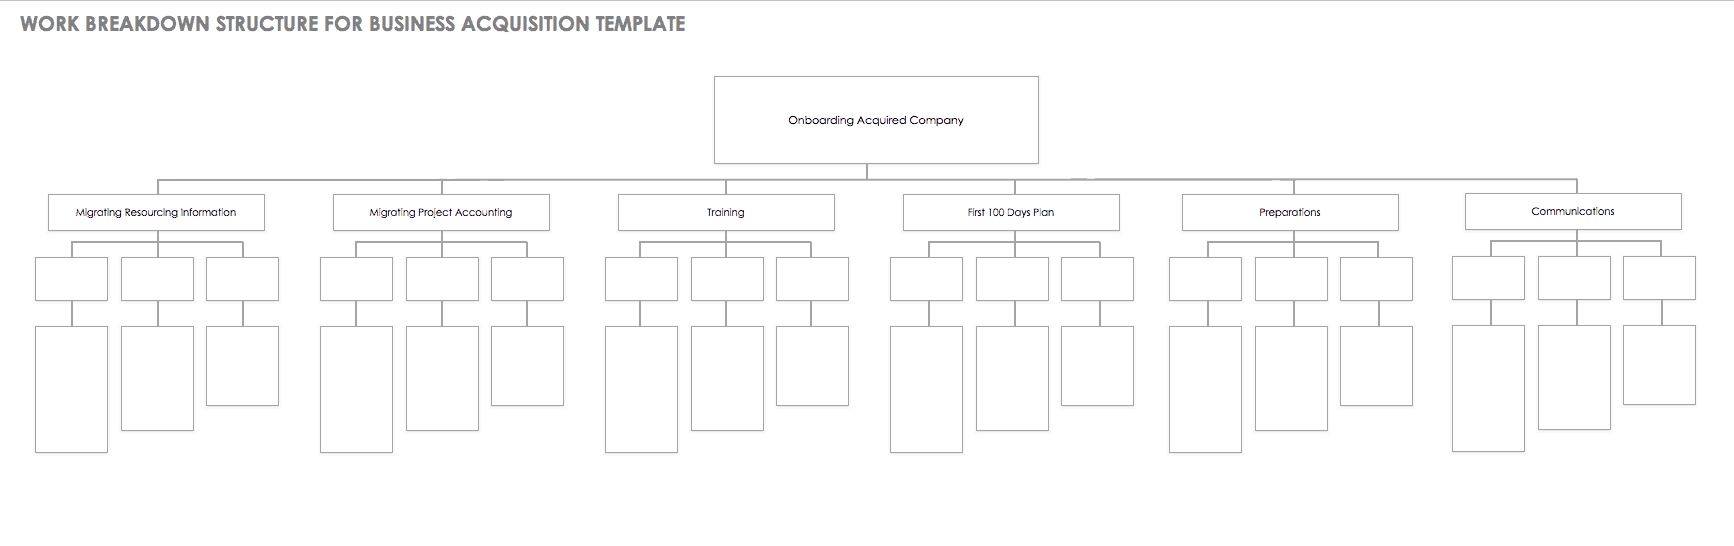 Work Breakdown Structure for Business Acquisition Template